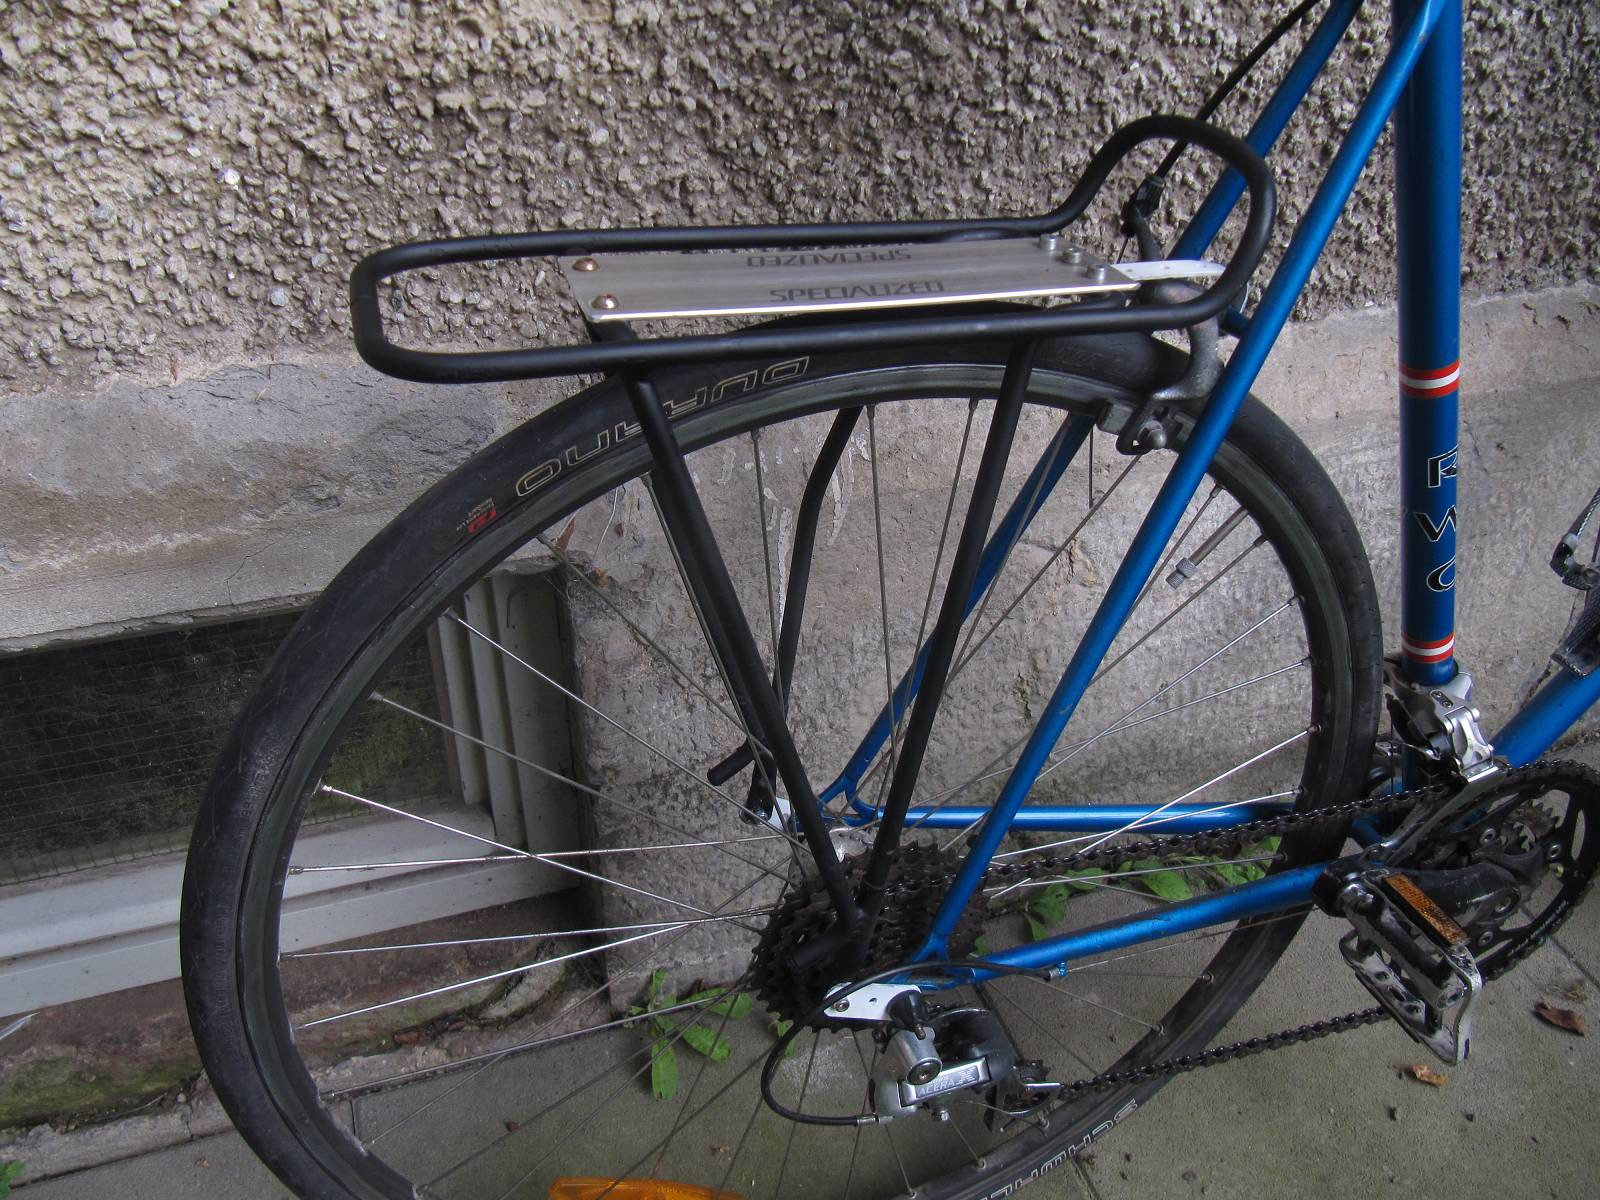 Best ideas about DIY Bike Rear Rack
. Save or Pin The DIY Bicycle Blog Mounting a rear MTB rack on a road bike Now.